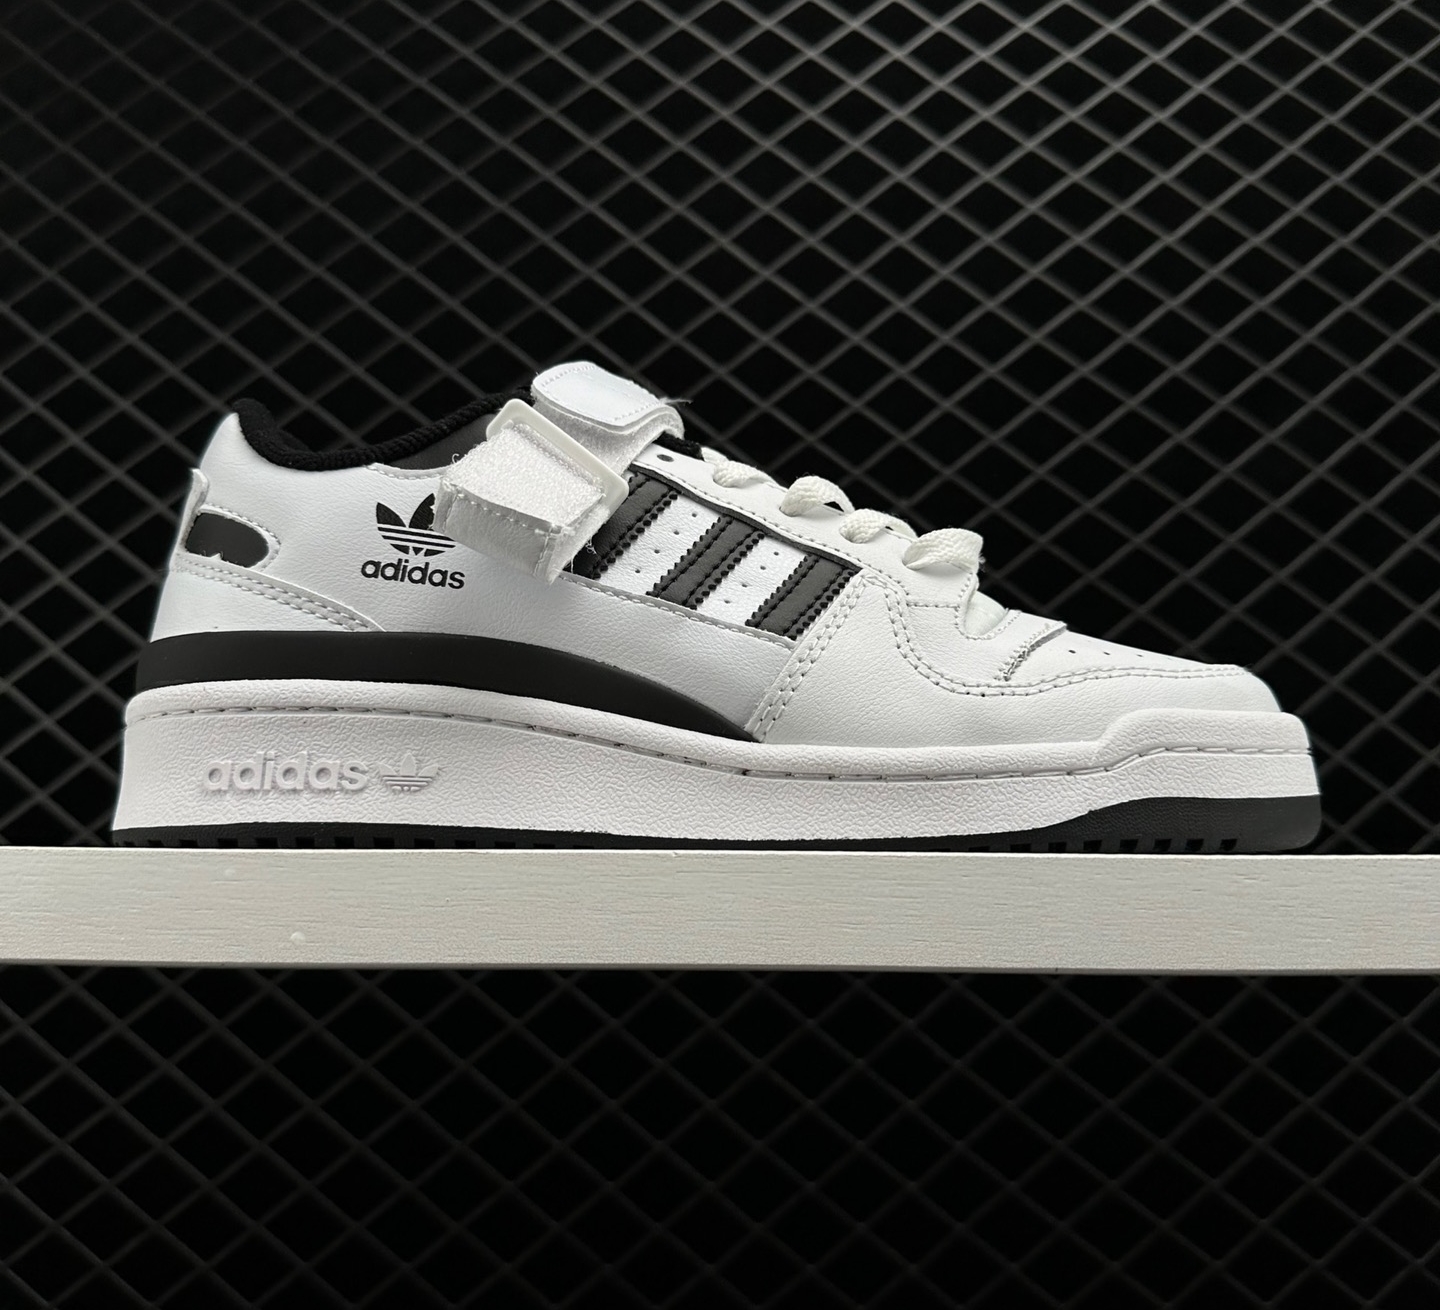 Adidas Forum Low 'White Black' FY7757 - Classic Style and Timeless Appeal